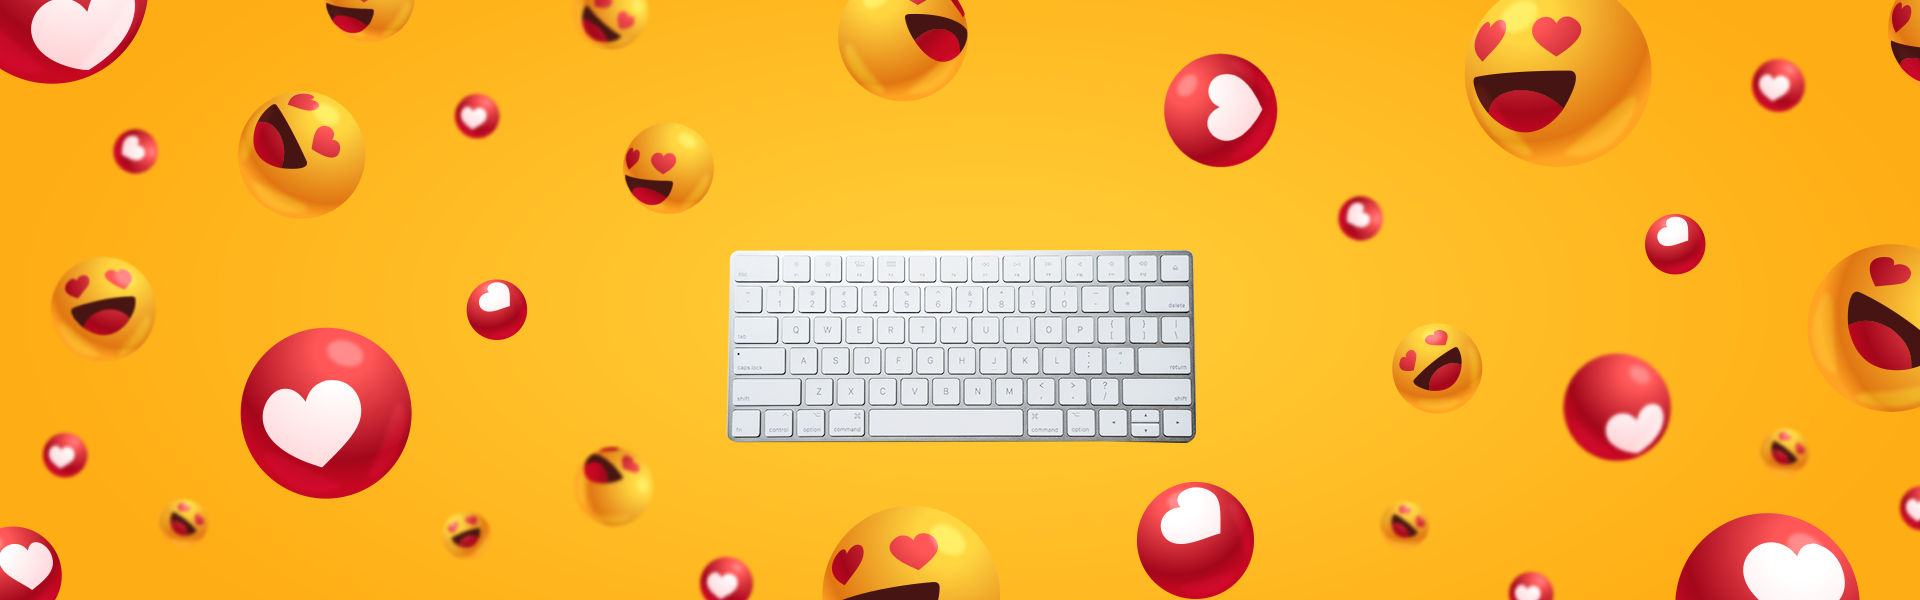 Image of a computer keyboard on a tiled yellow background featuring emojis